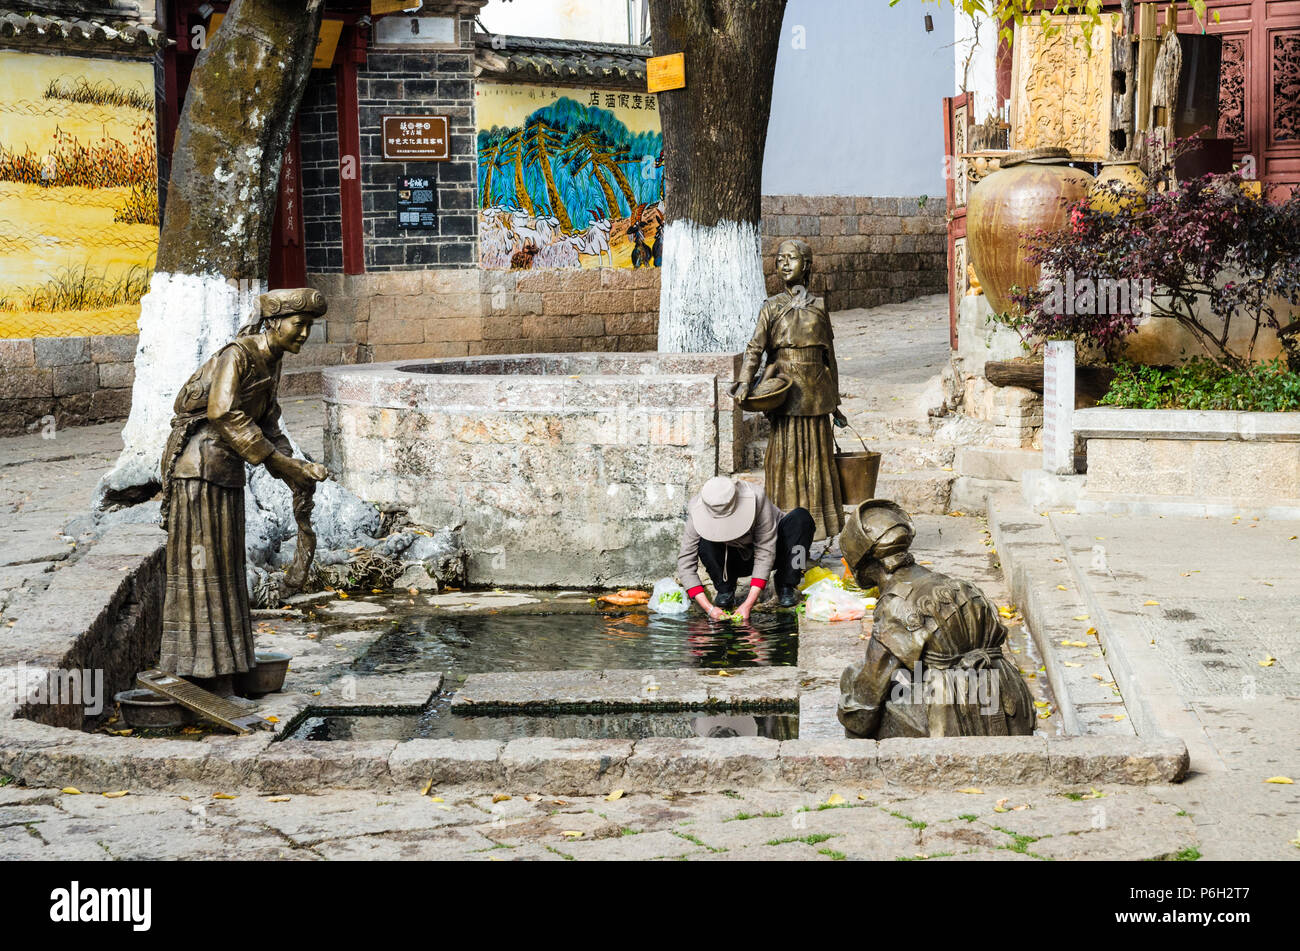 Local resident washing vegetables from a well next to three bronze statues of Naxi women in Lijiang Old Town, China Stock Photo